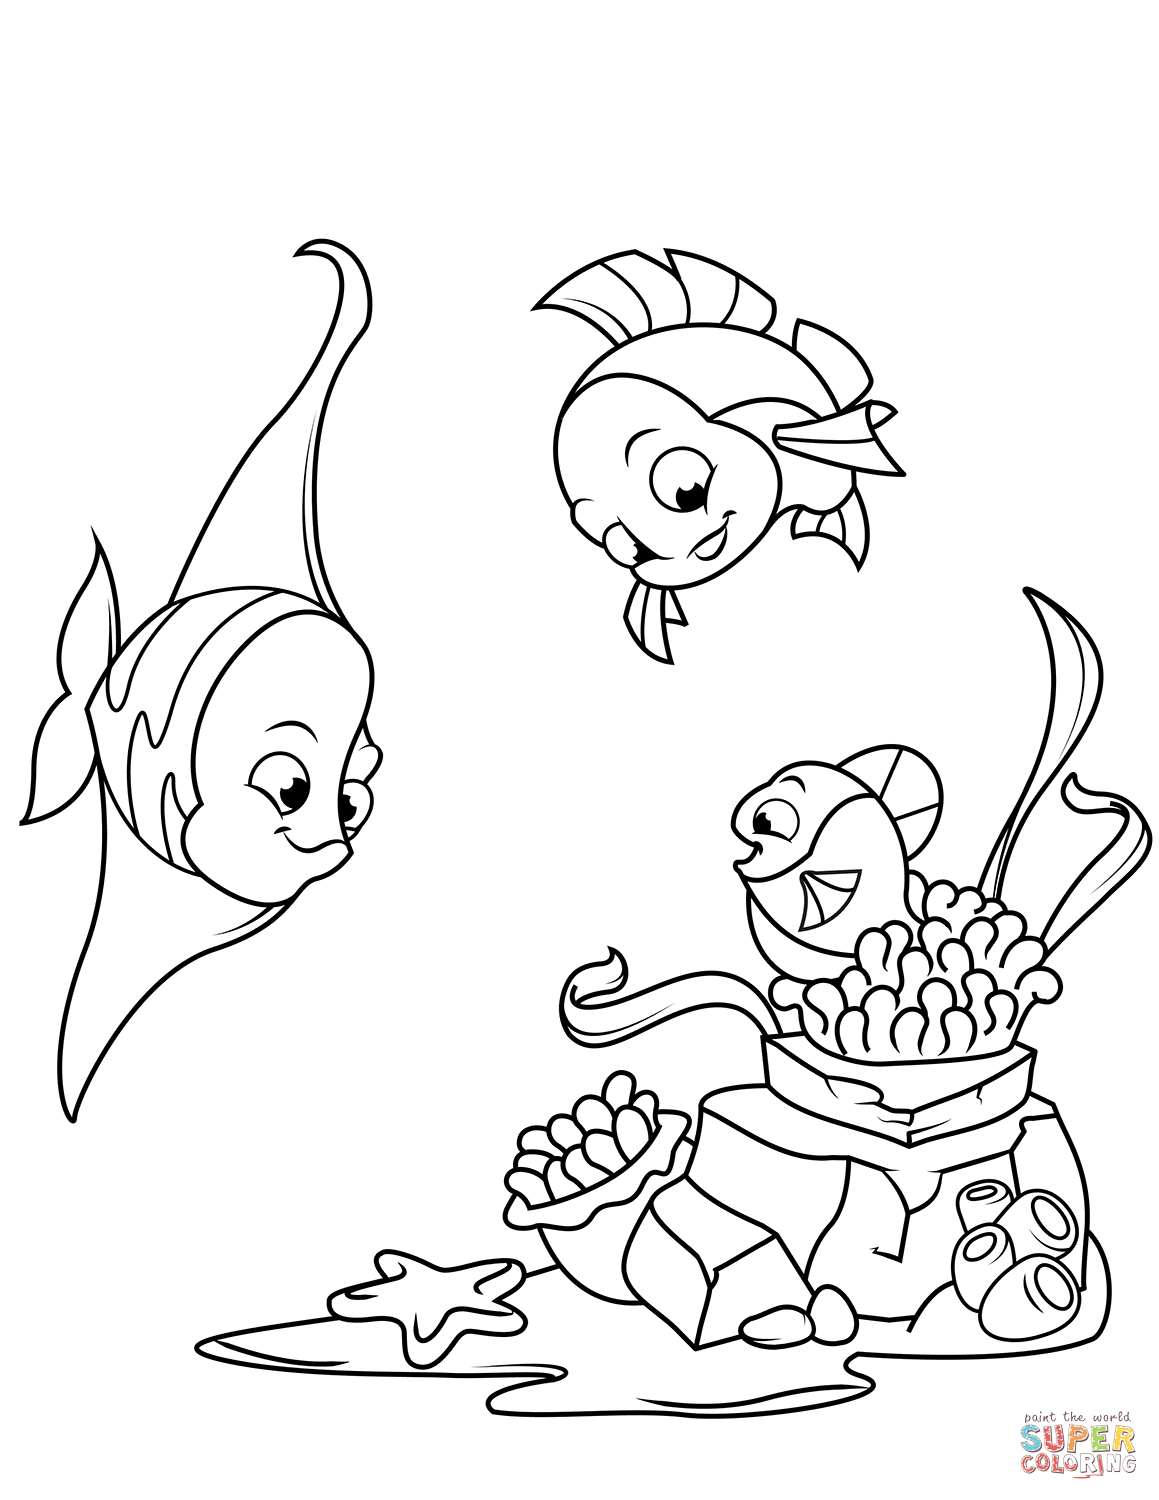 Cute Great Barrier Reef Fish Coloring Page for Adult